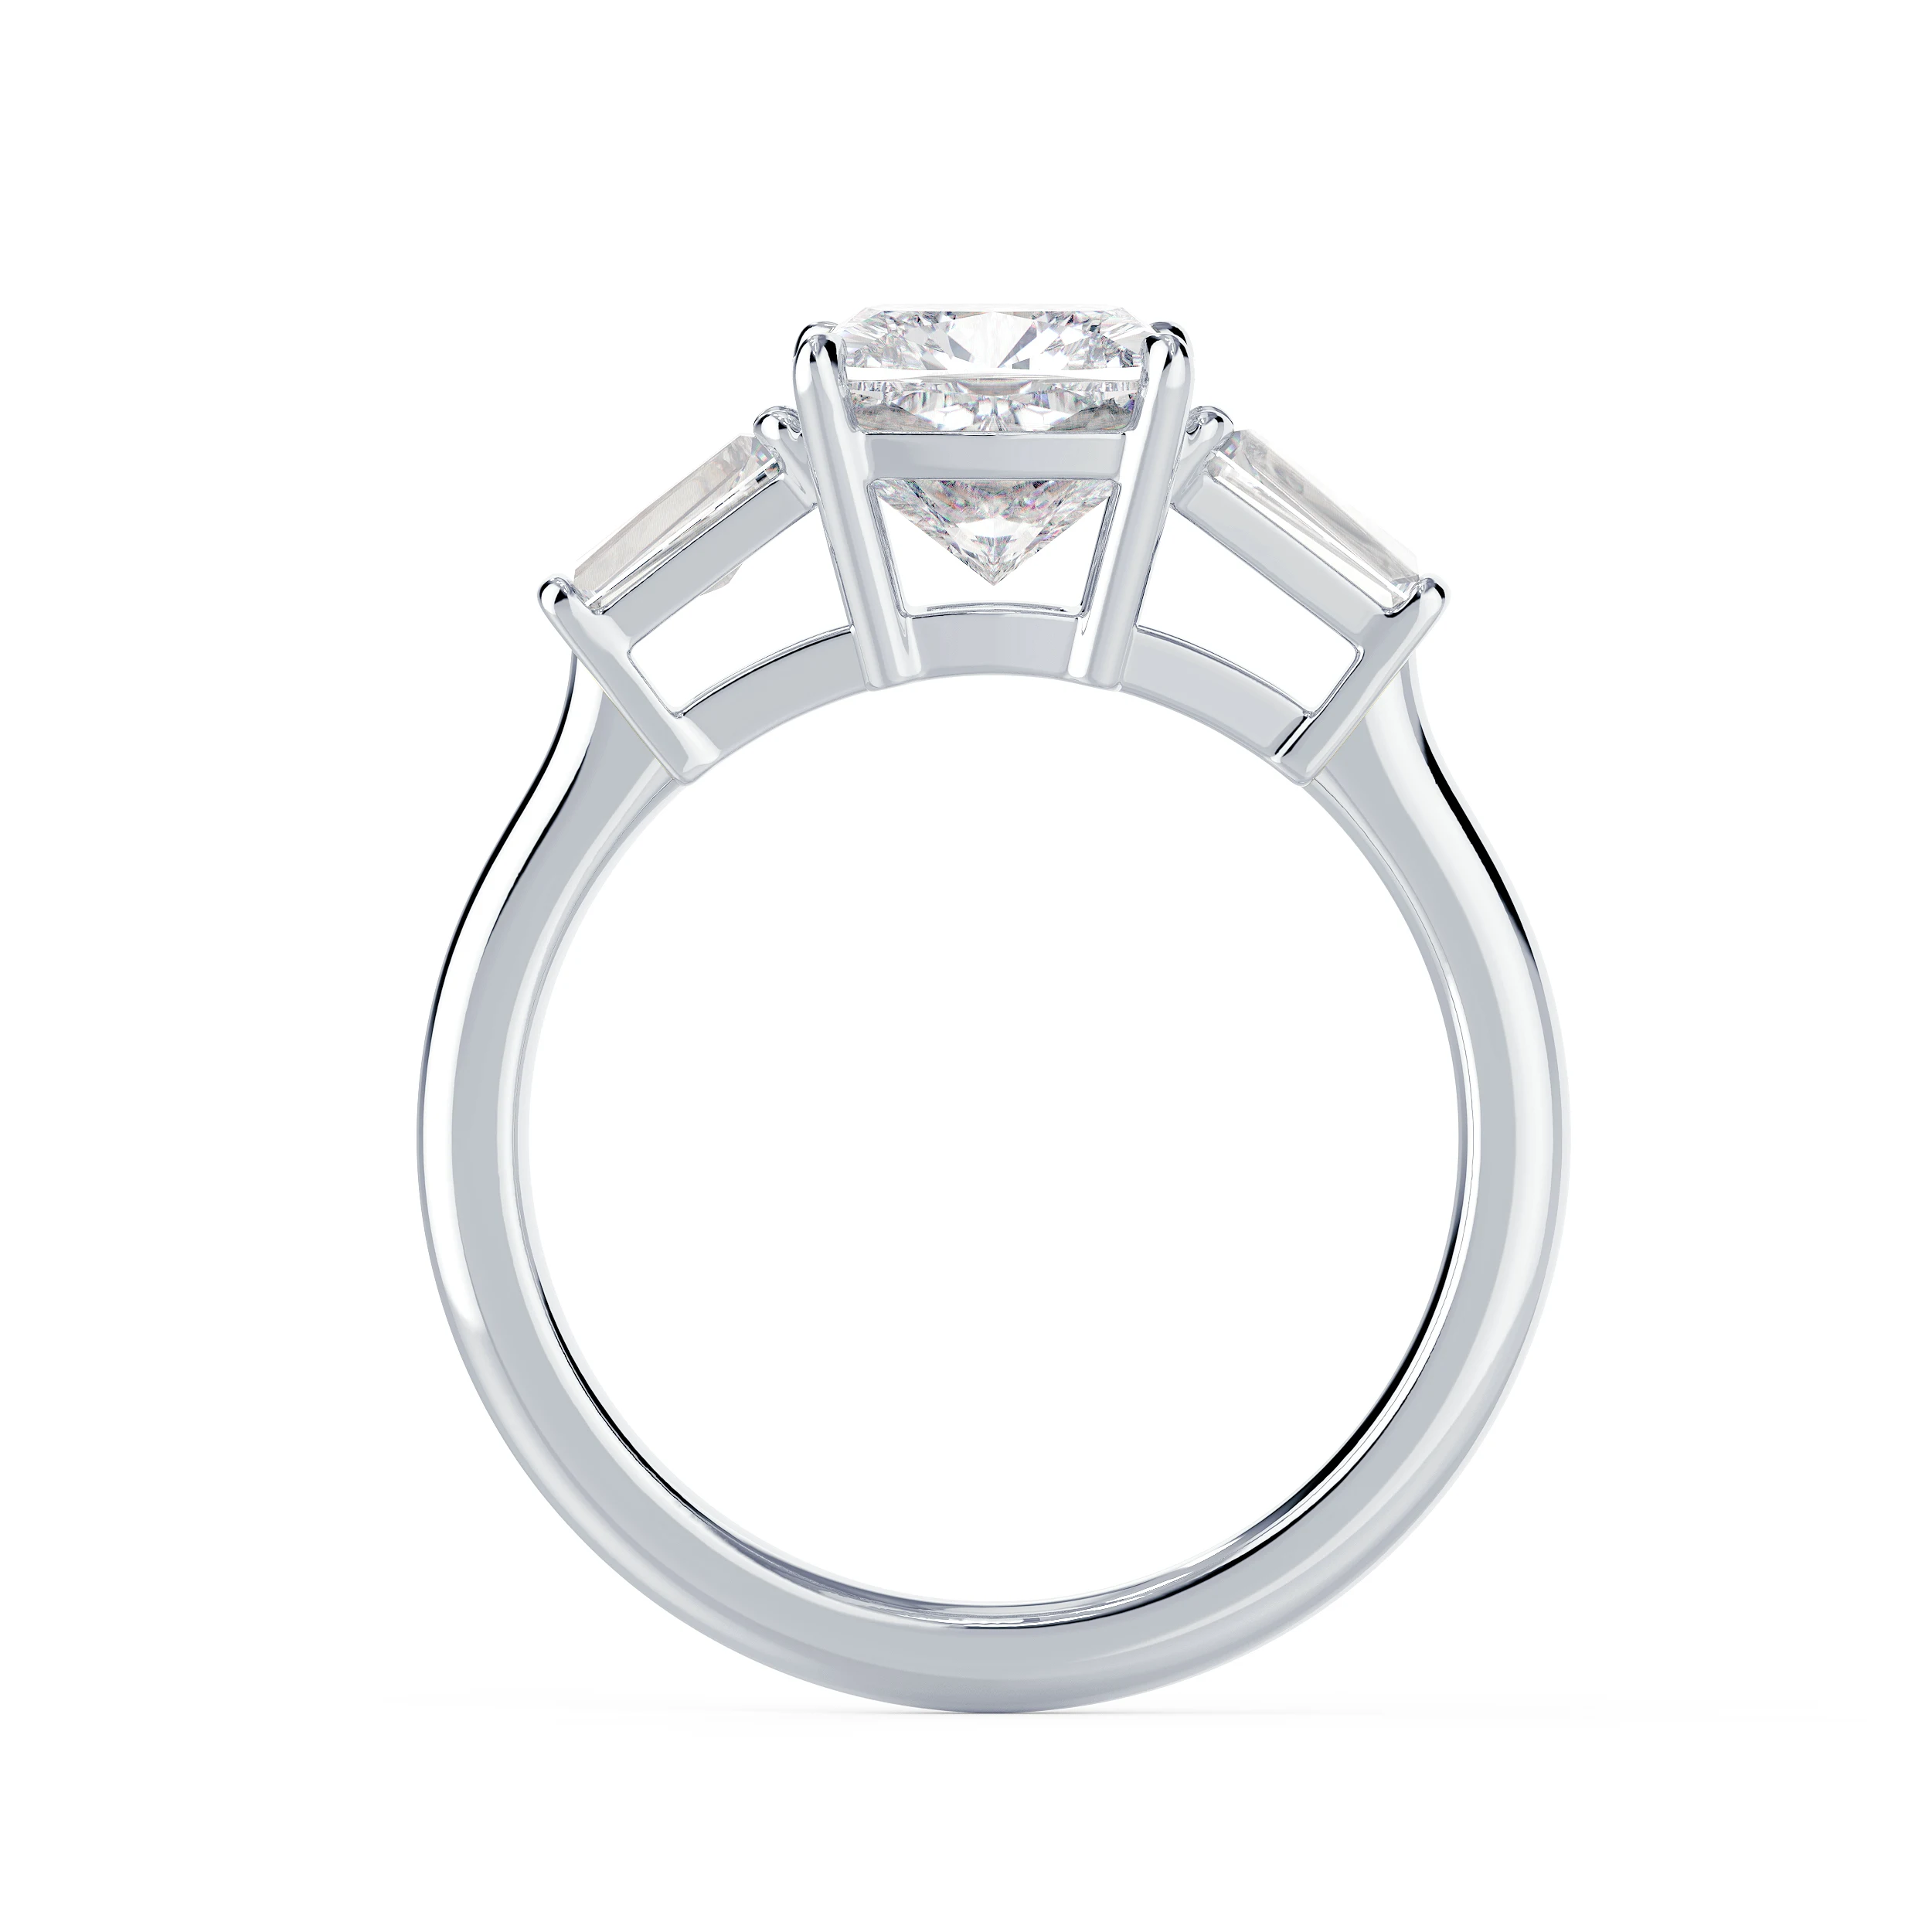 Diamonds set in White Gold Cushion and Baguette Diamond Engagement Ring (Profile View)